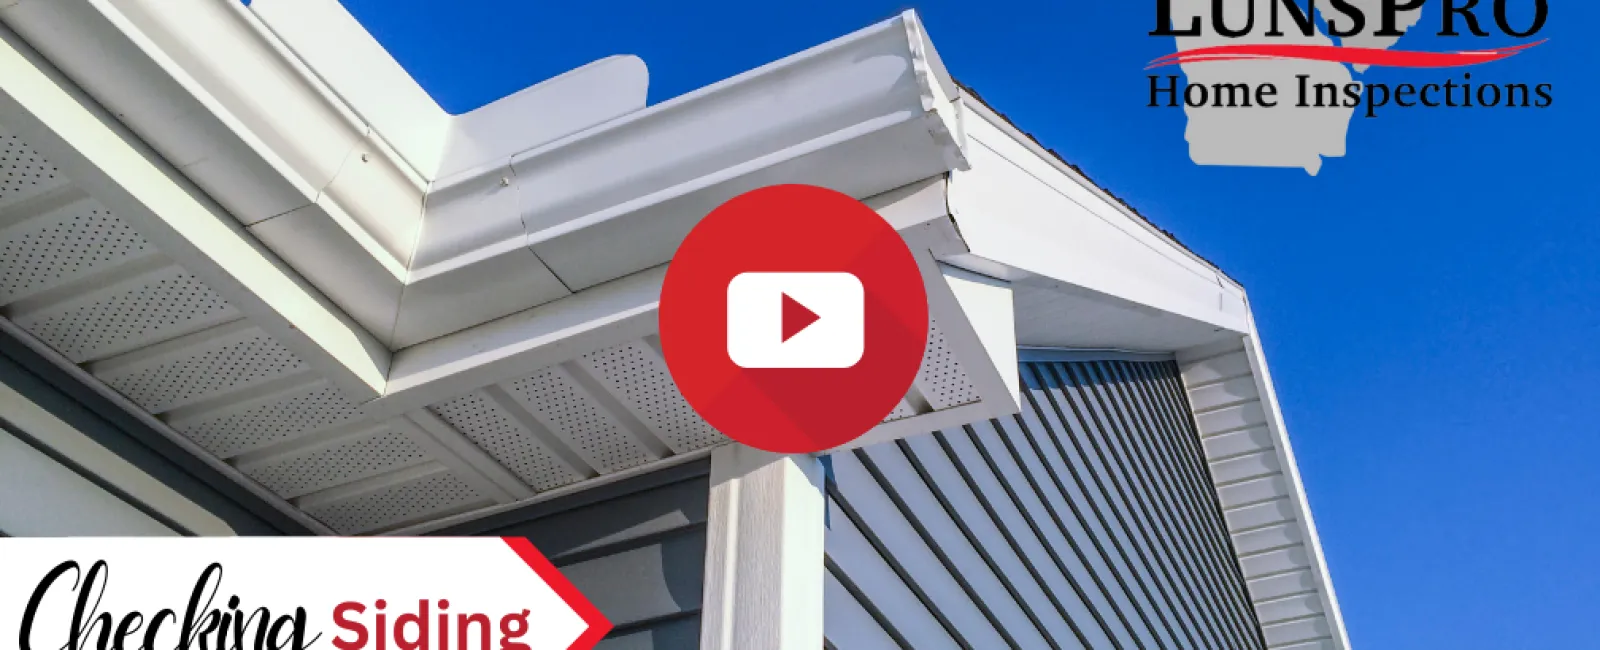 What do you look for while checking Siding?